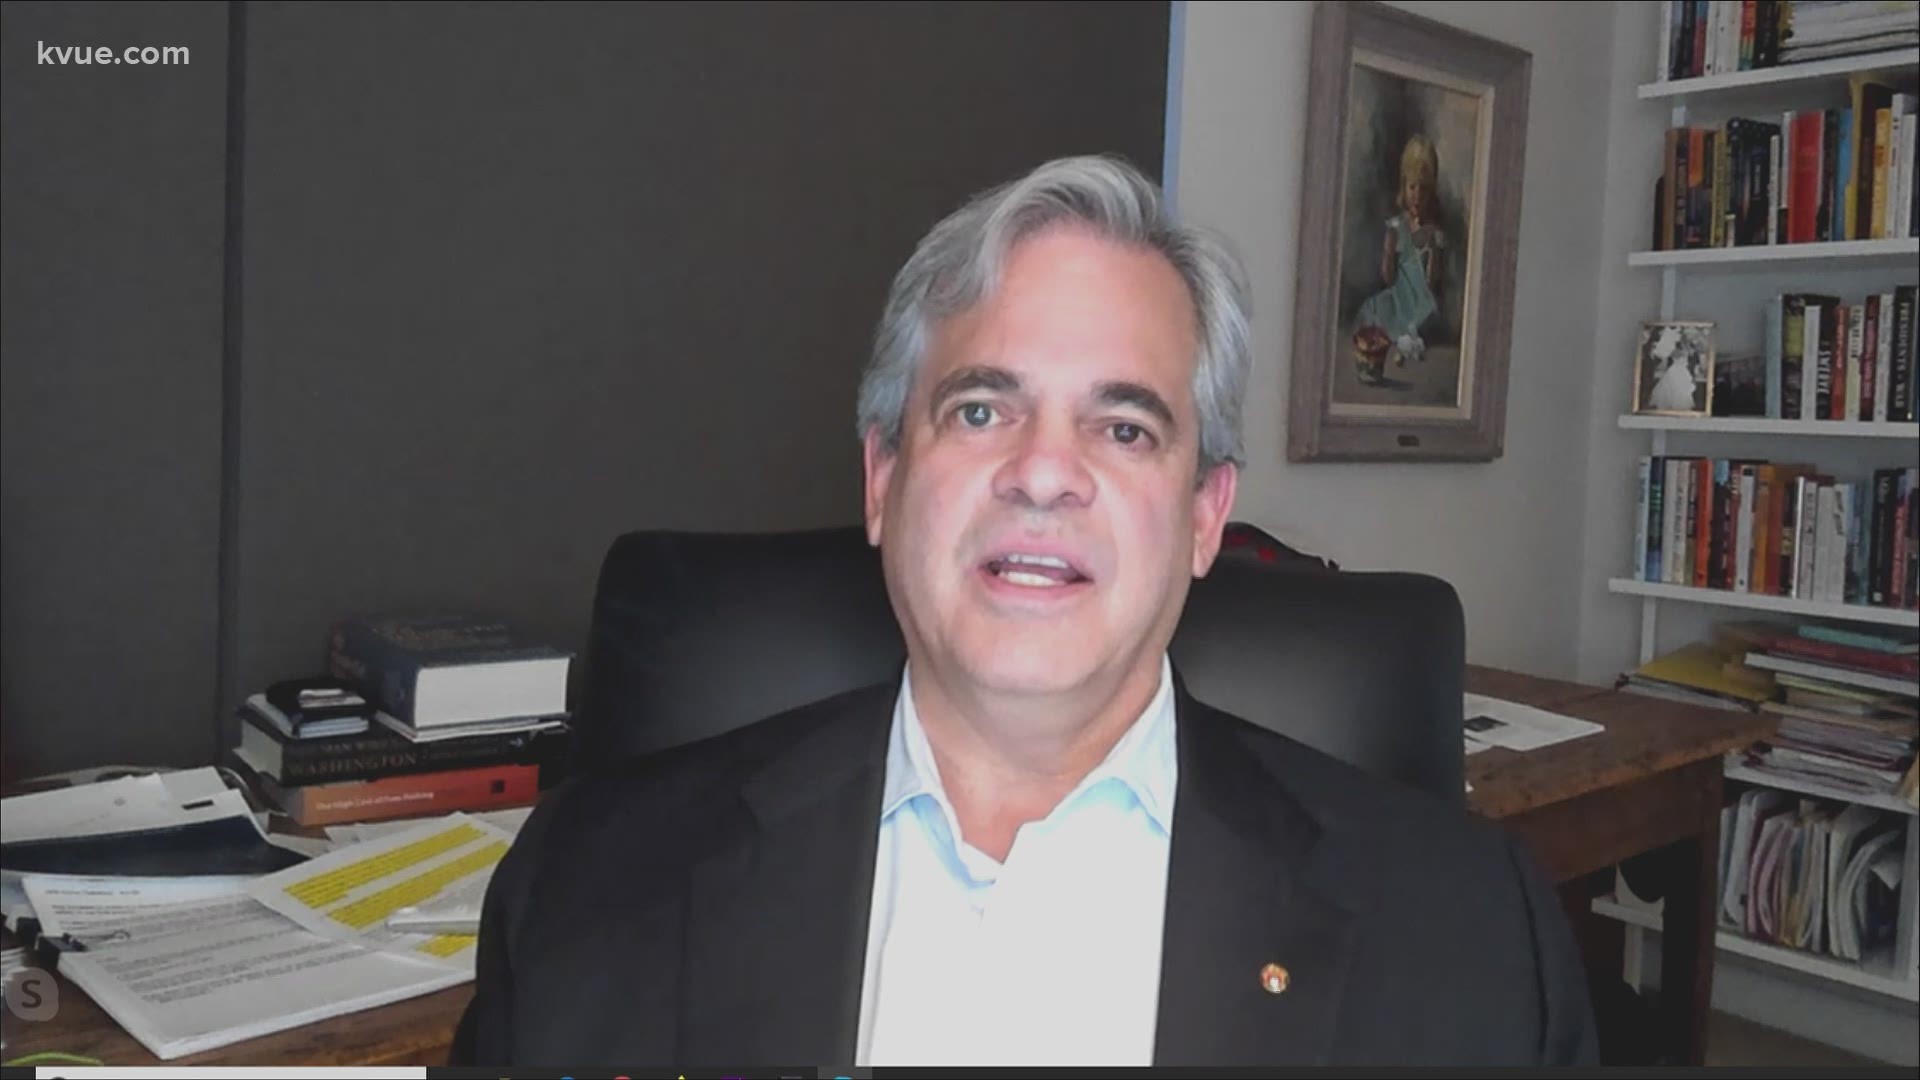 Mayor Adler joined us live to speak on the dine-in restrictions for bars and restaurants around the holiday.